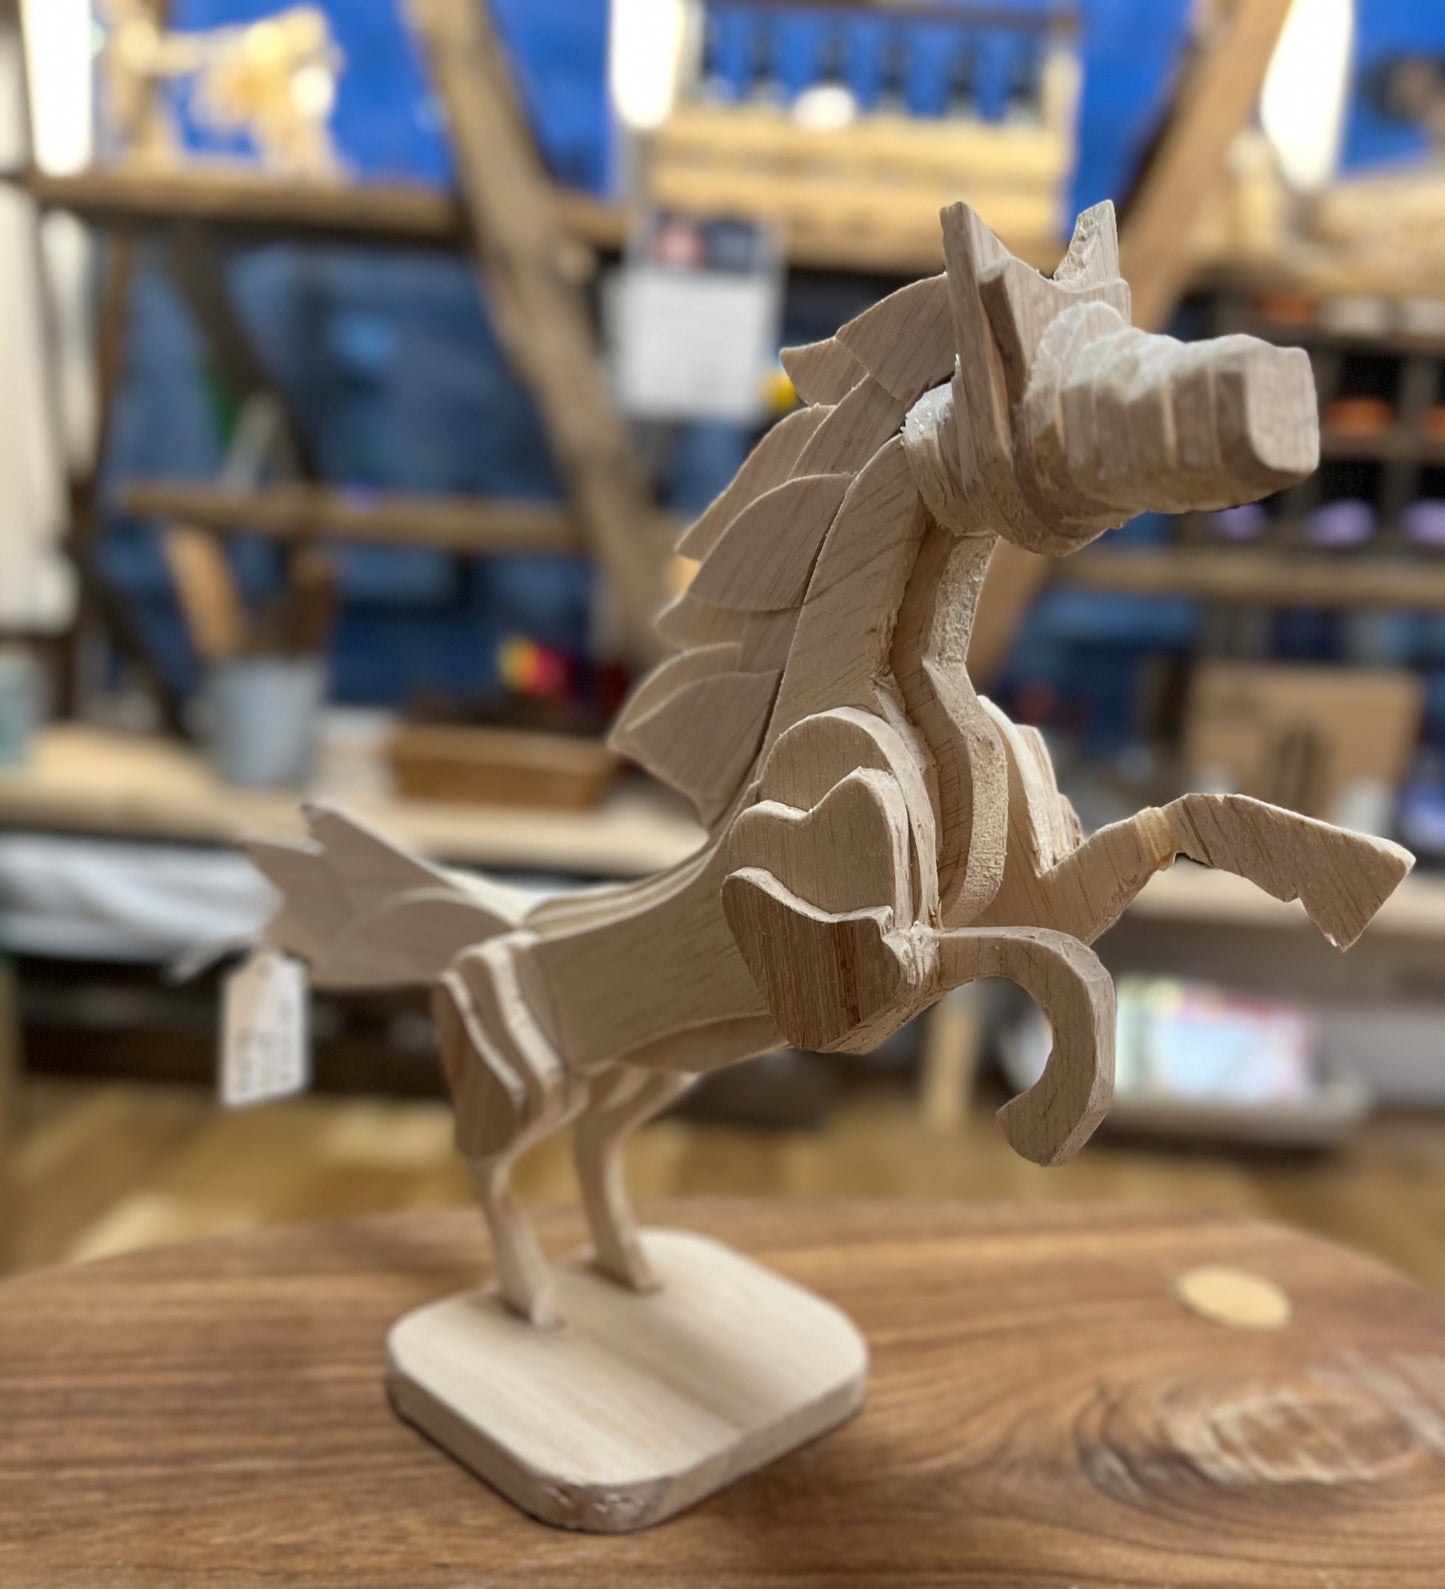 Leaping Horse - Wood Sculpture